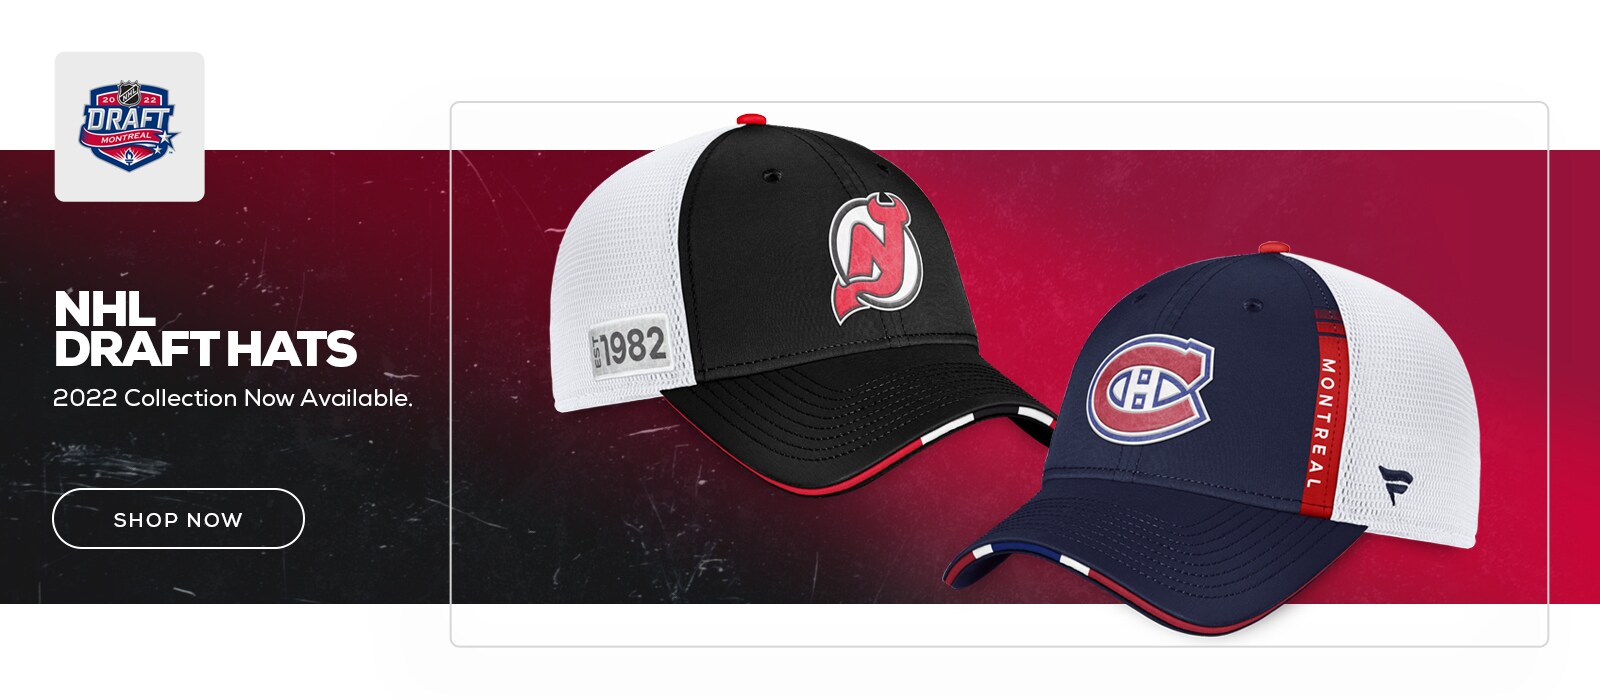 NHL Draft Hats. New 2022 Collection Now Available! Shop Now